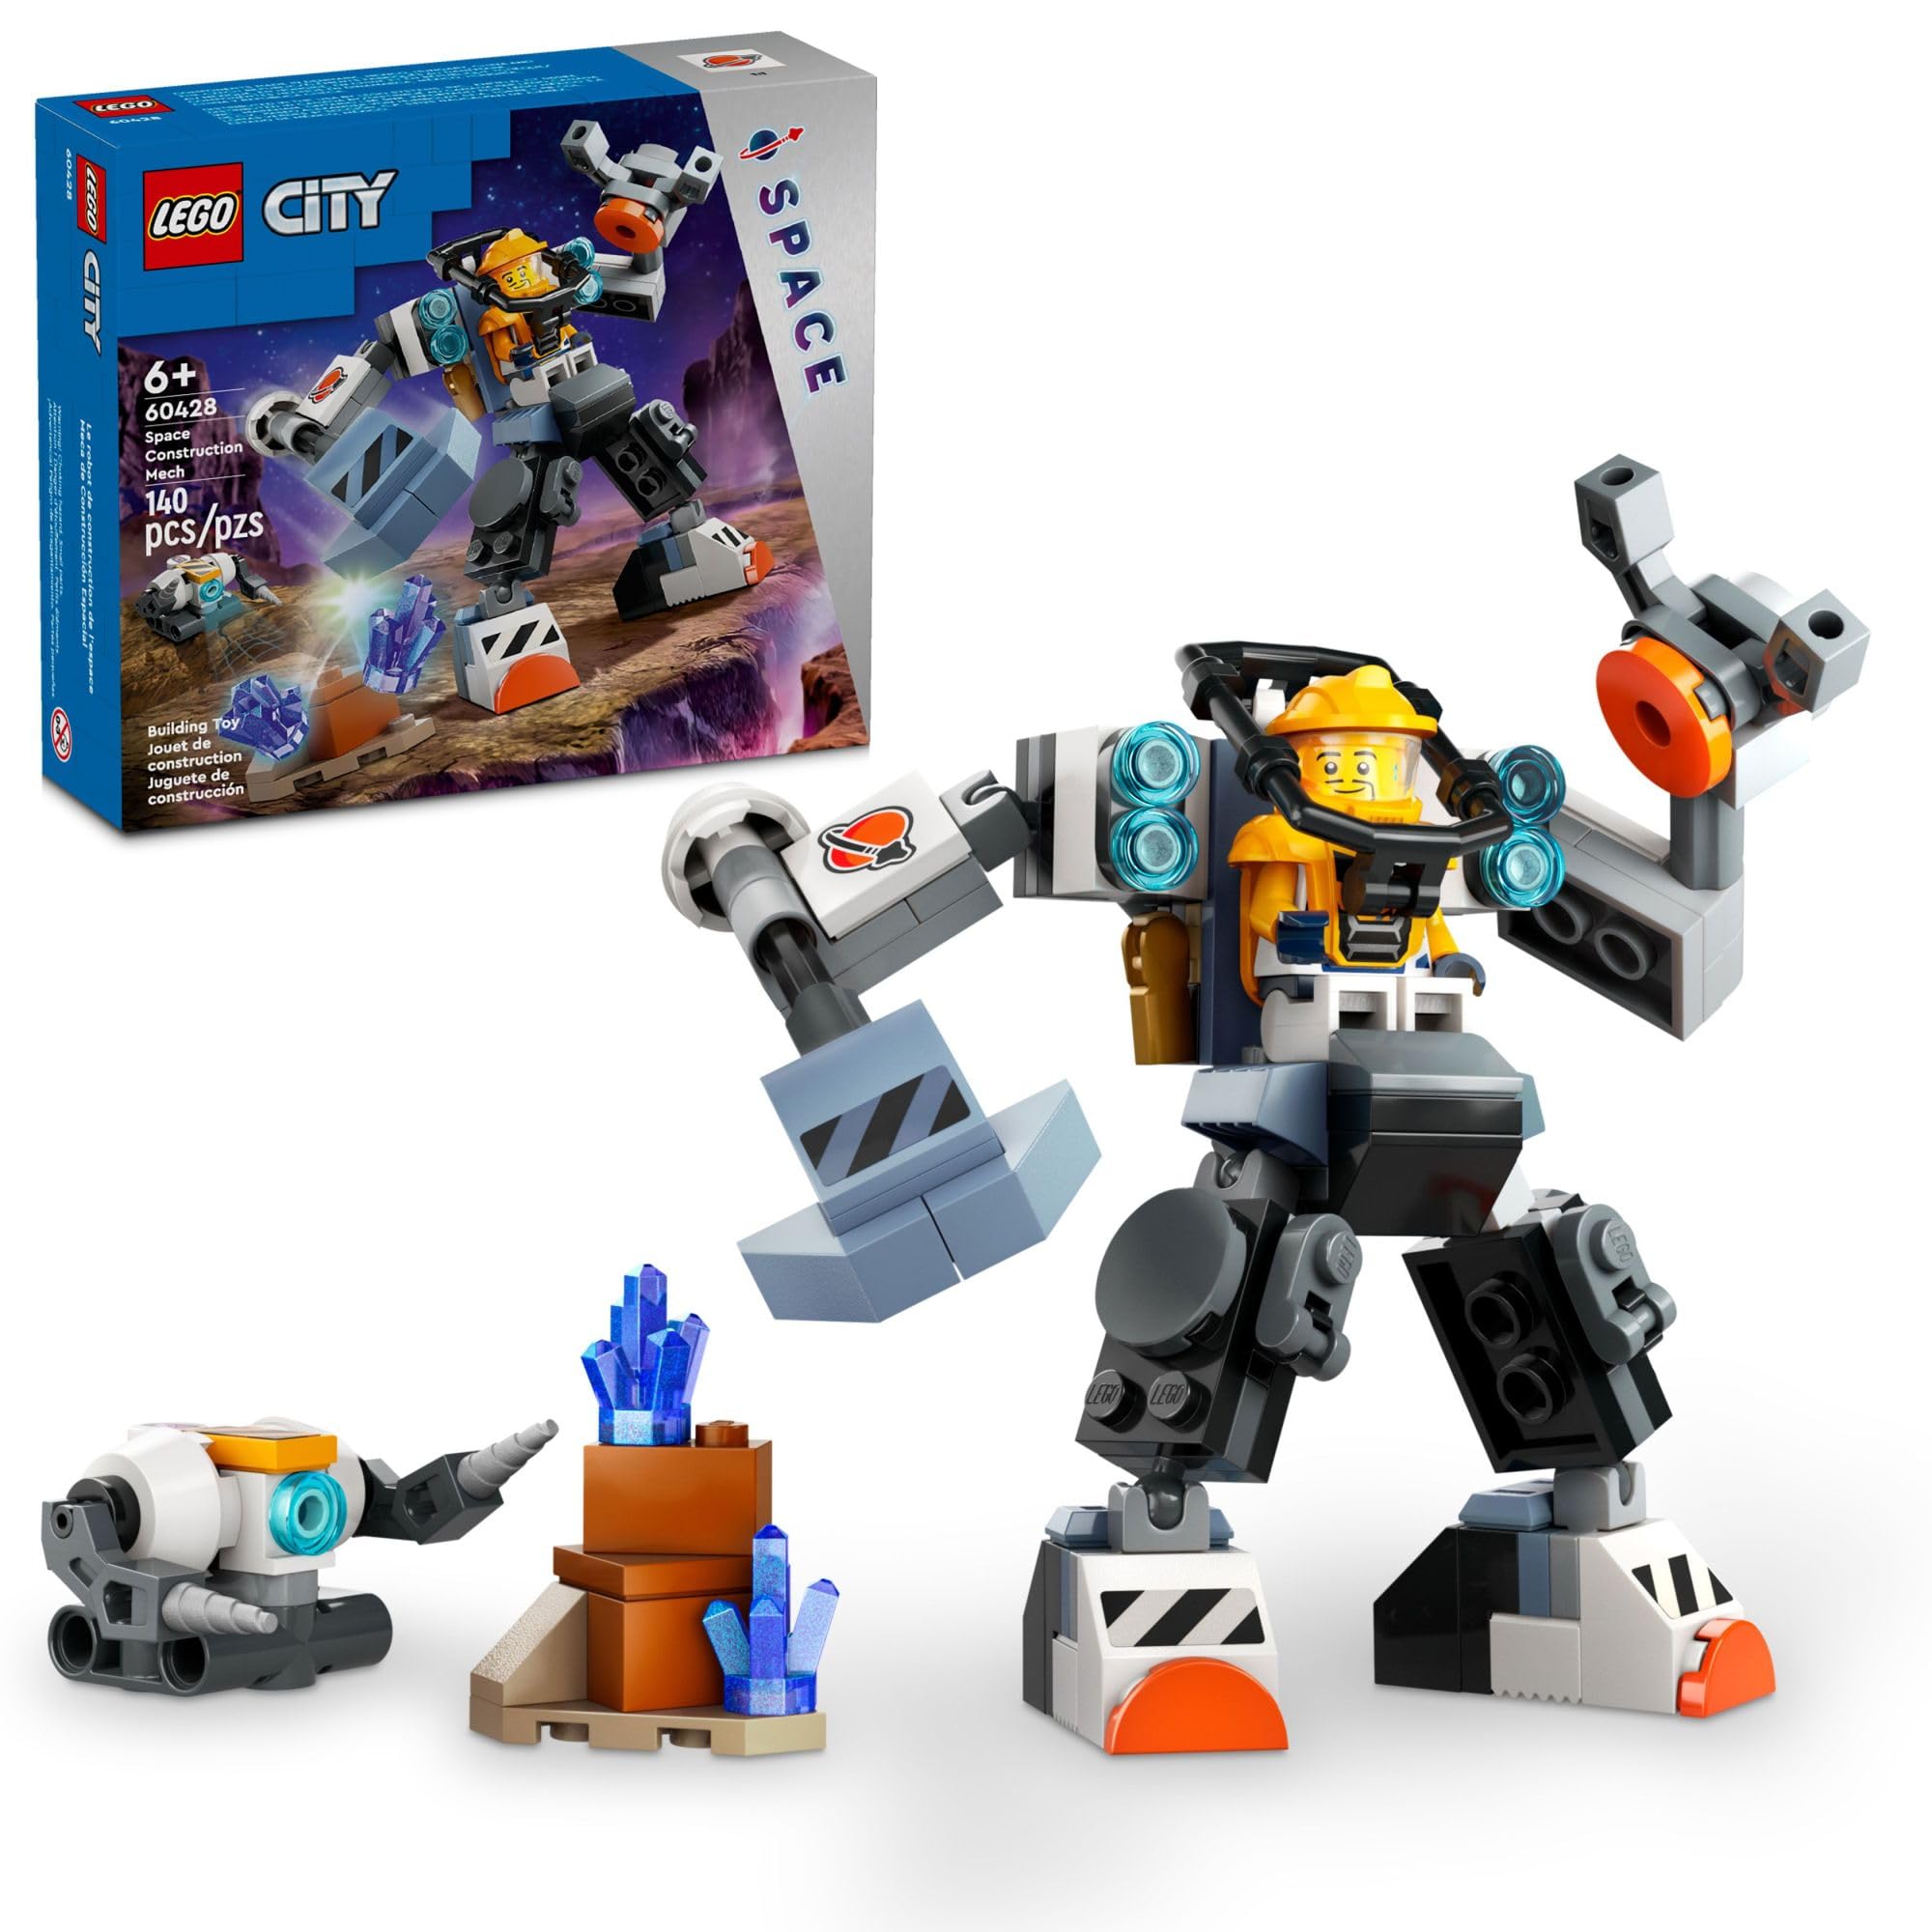 140-Piece LEGO City Space Construction Mech Suit Building Set (60428) $7.49 + Free Shipping w/ Prime or on $35+